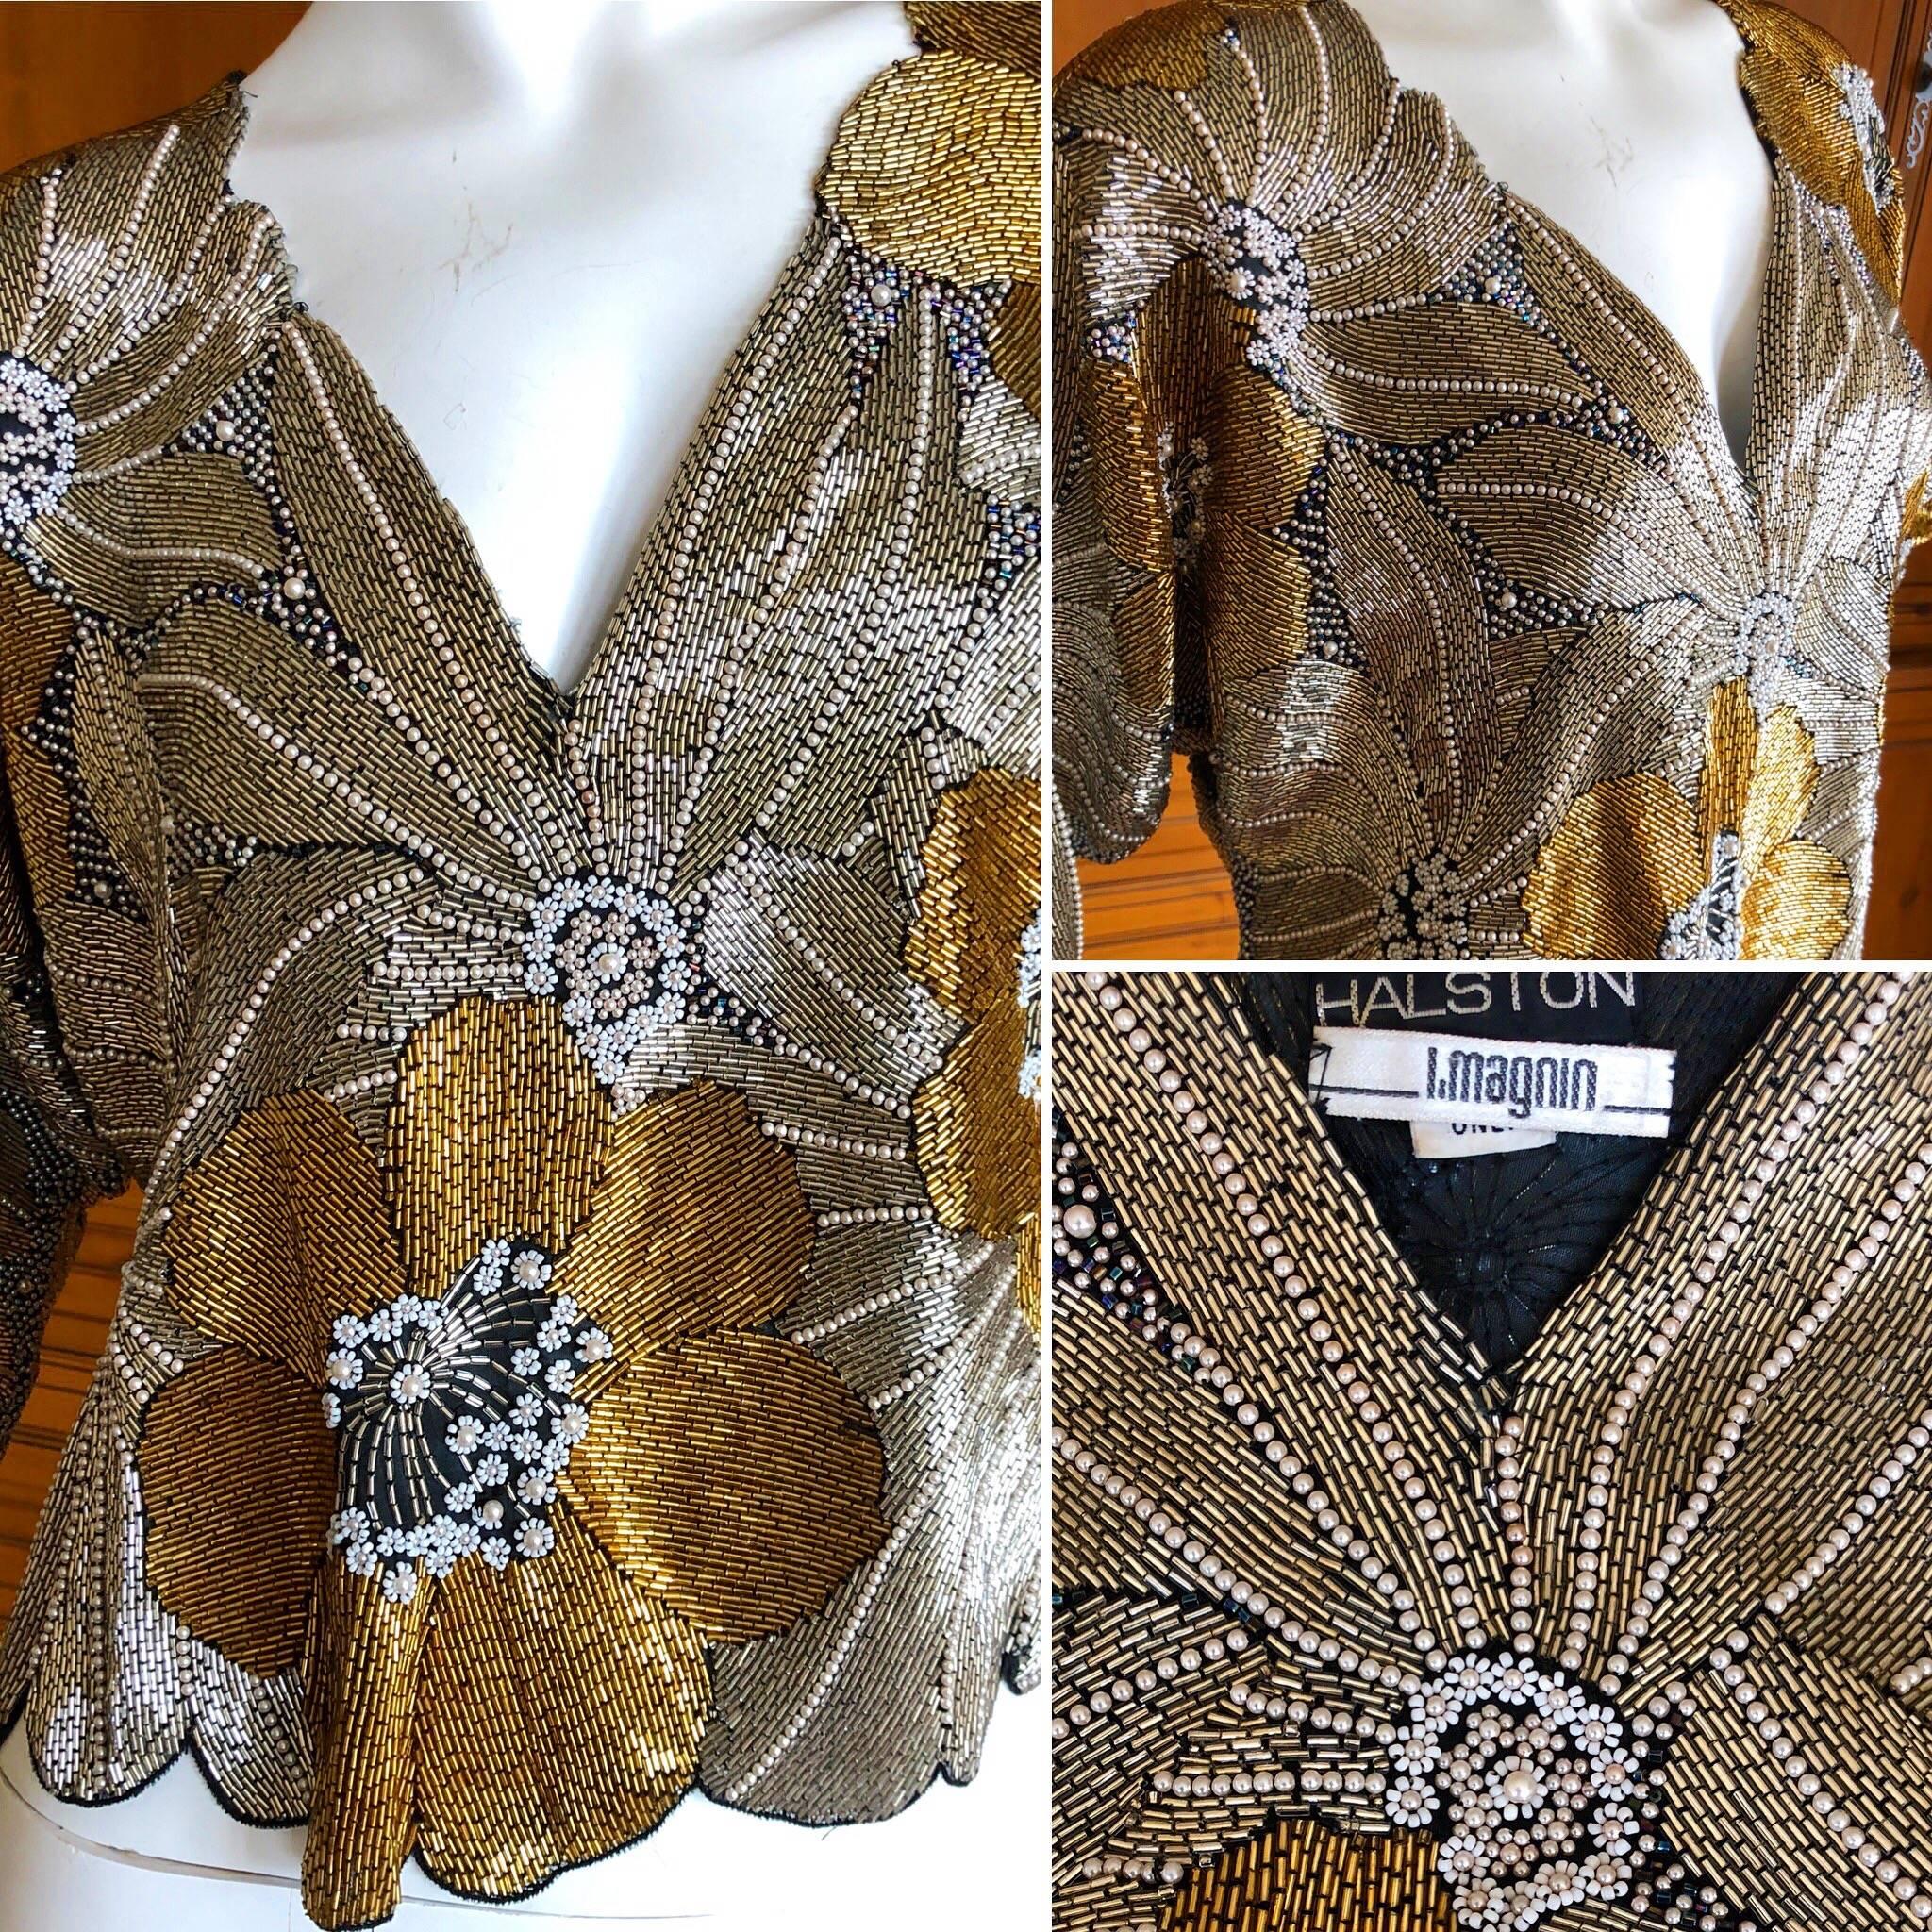 Halston Disco Era Gold Bugle Bead and Pearl Embellished Top, 1970s  14